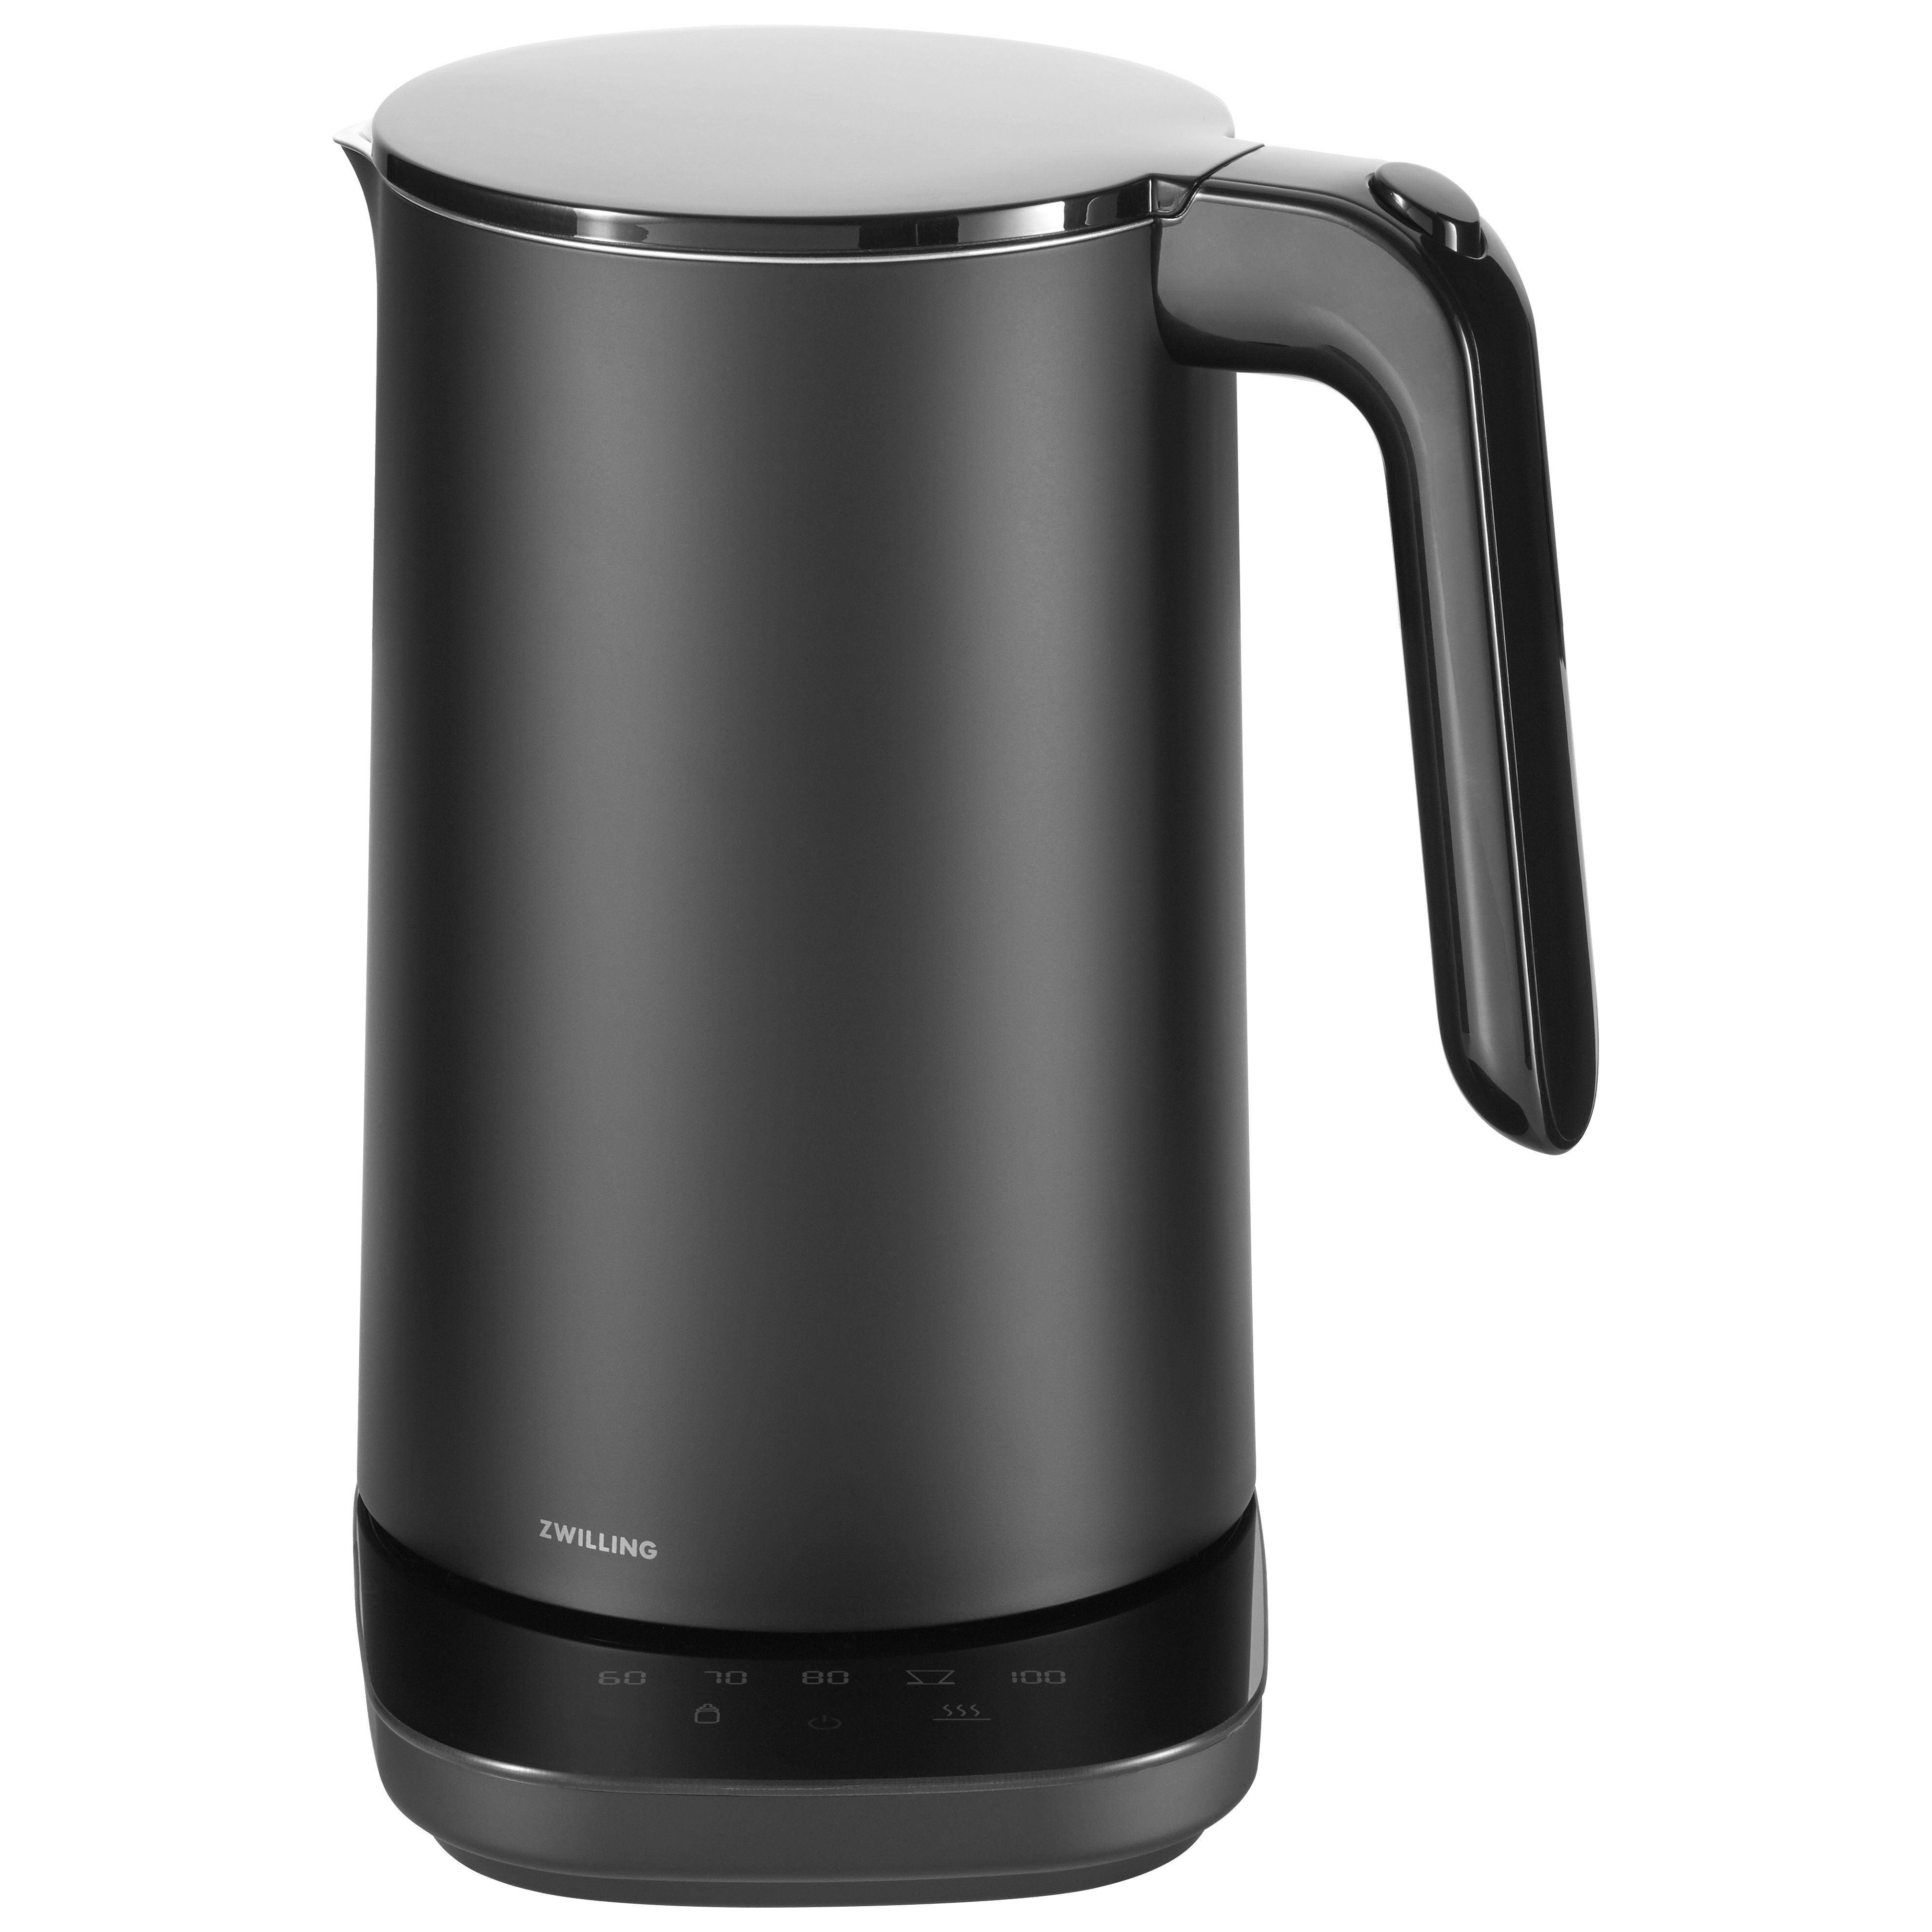 80 degree mate electric kettle temperature